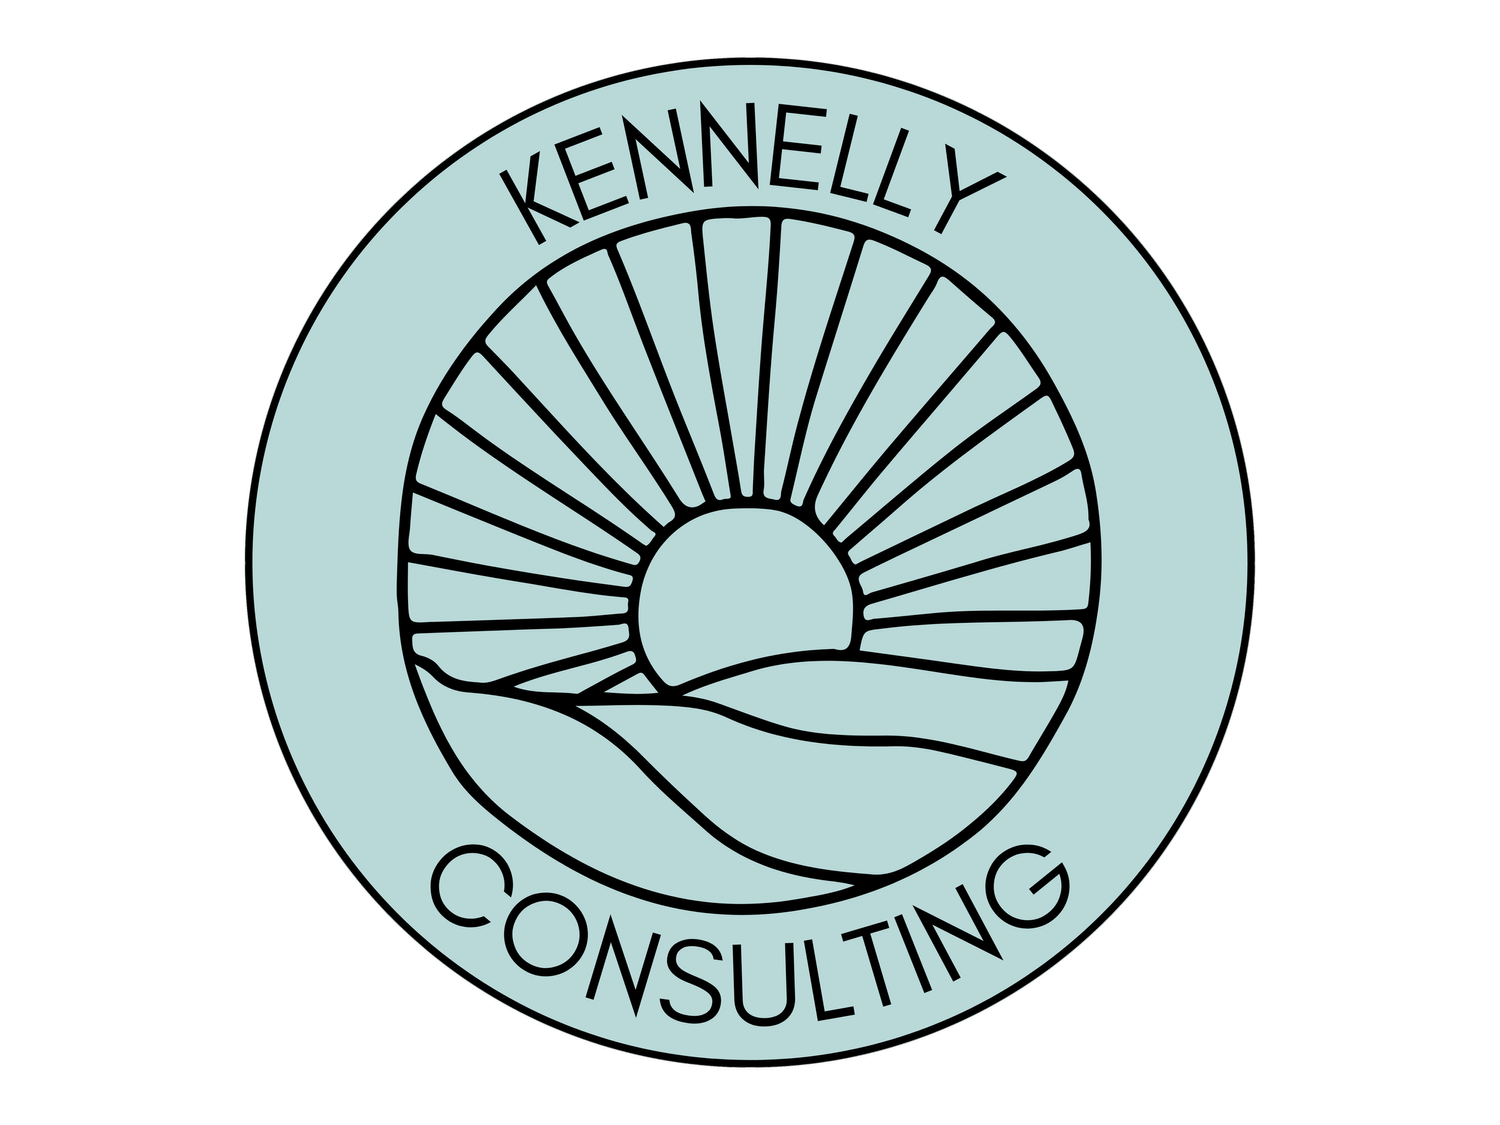 Kennelly Consulting